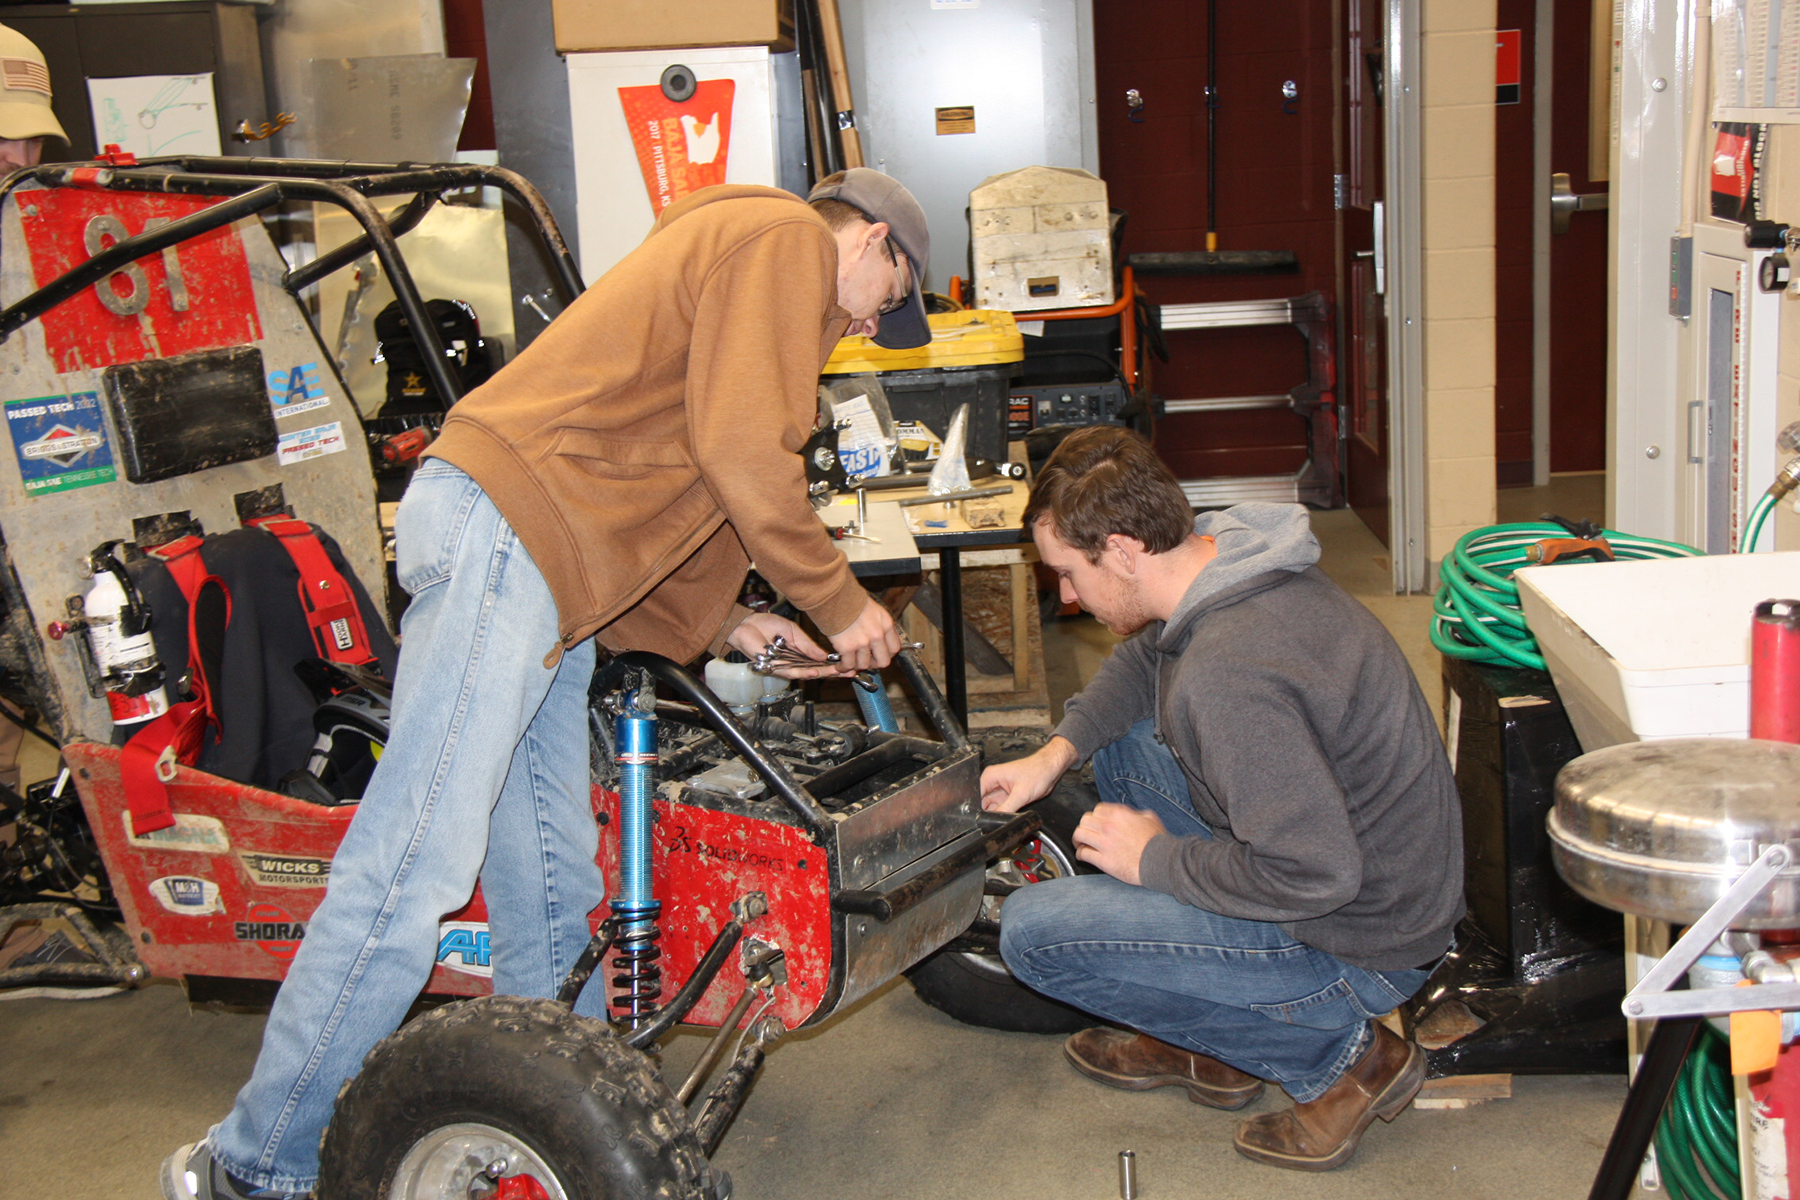 SIUE engineering students earn 6th place in Winter Baja race